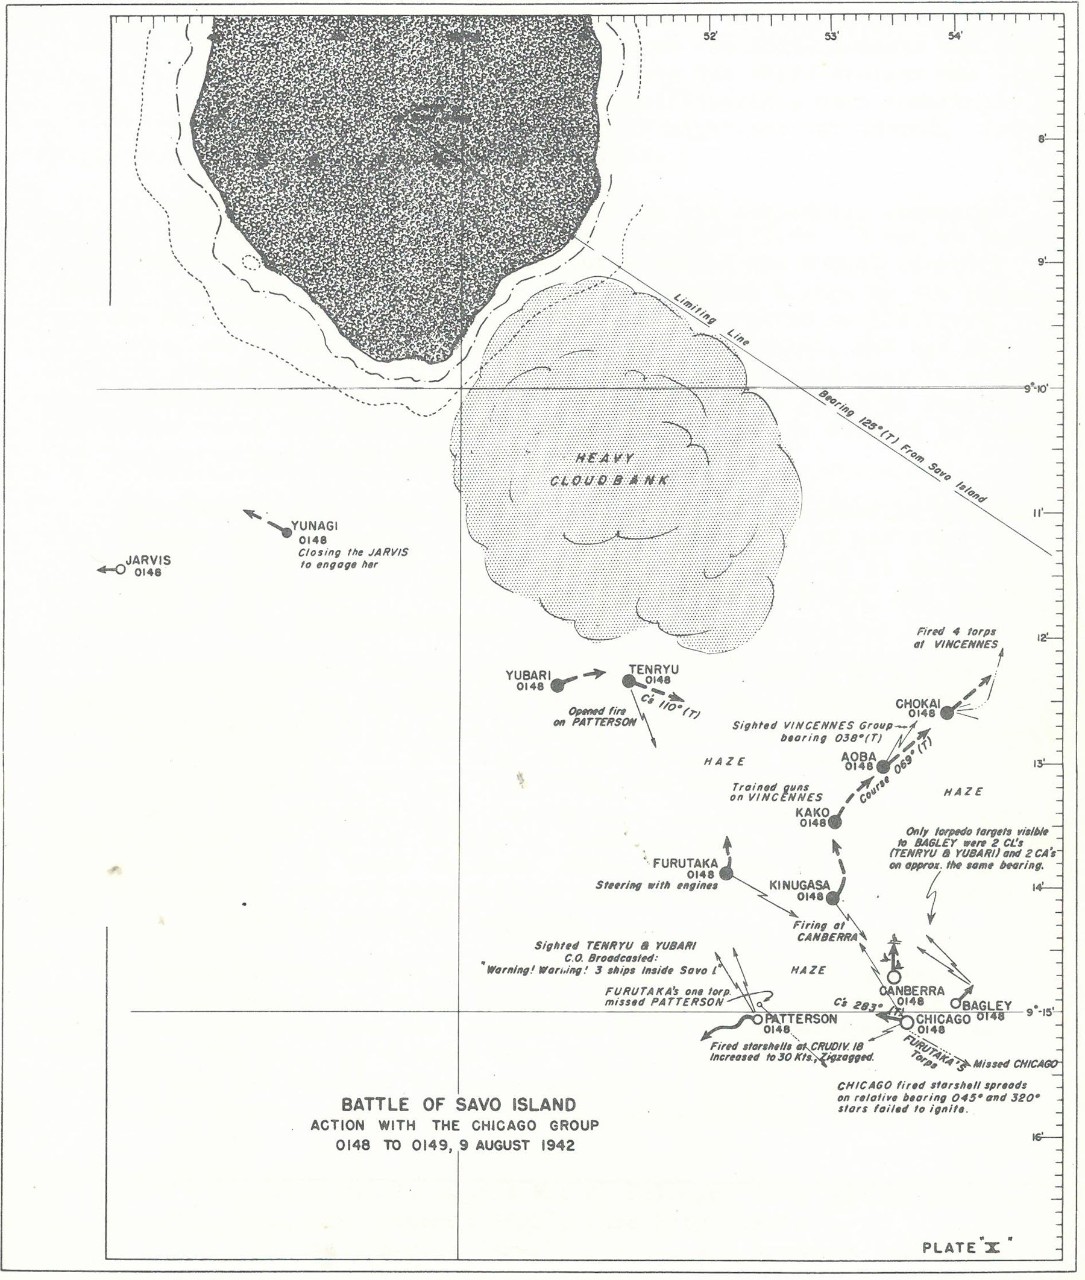 Plate 10: Battle of Savo Island, Action with the CHICAGO Group, 0148 to 0149, 9 August 1942 - chart - The Battle of Savo Island August 9, 1942 Strategical and Tactical Analysis